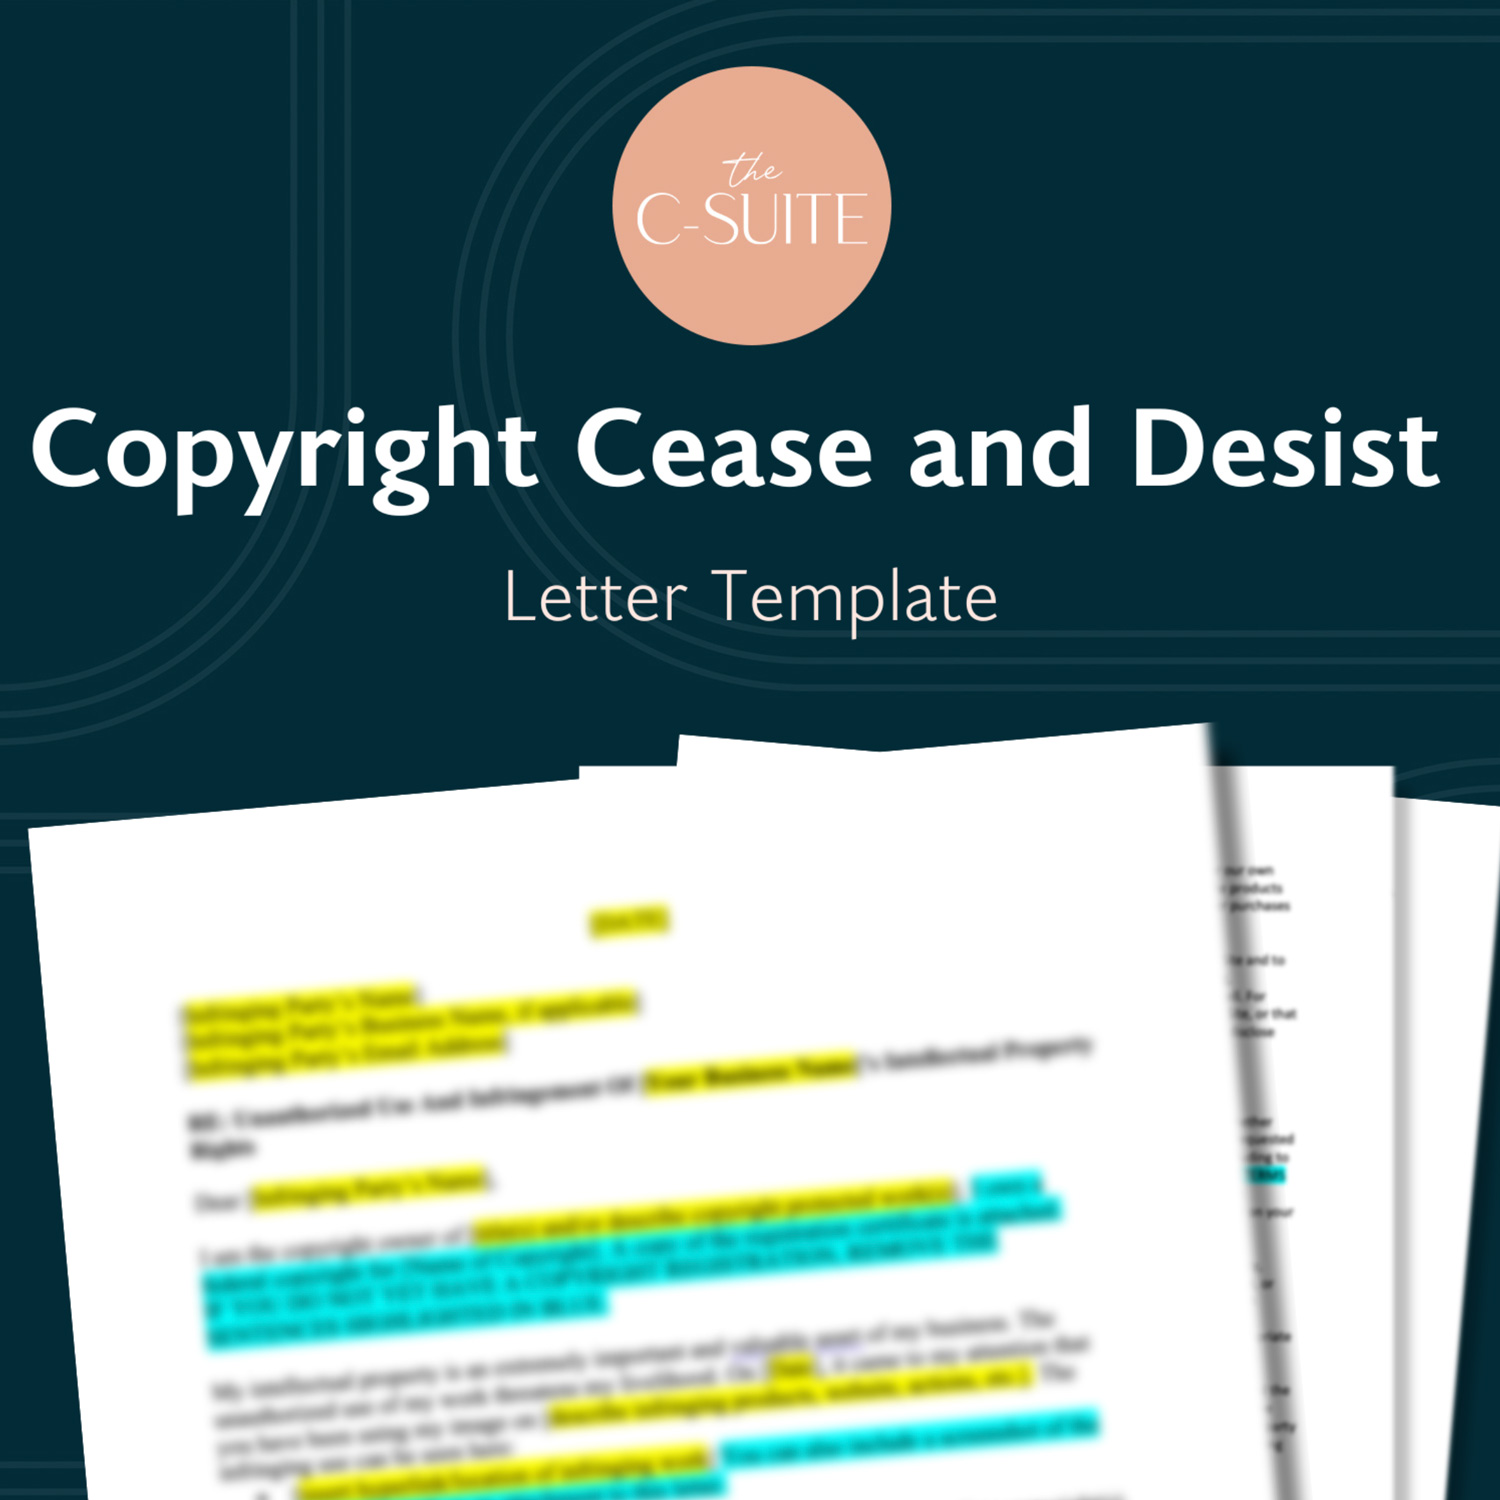 Copyright Cease and Desist Letter Template